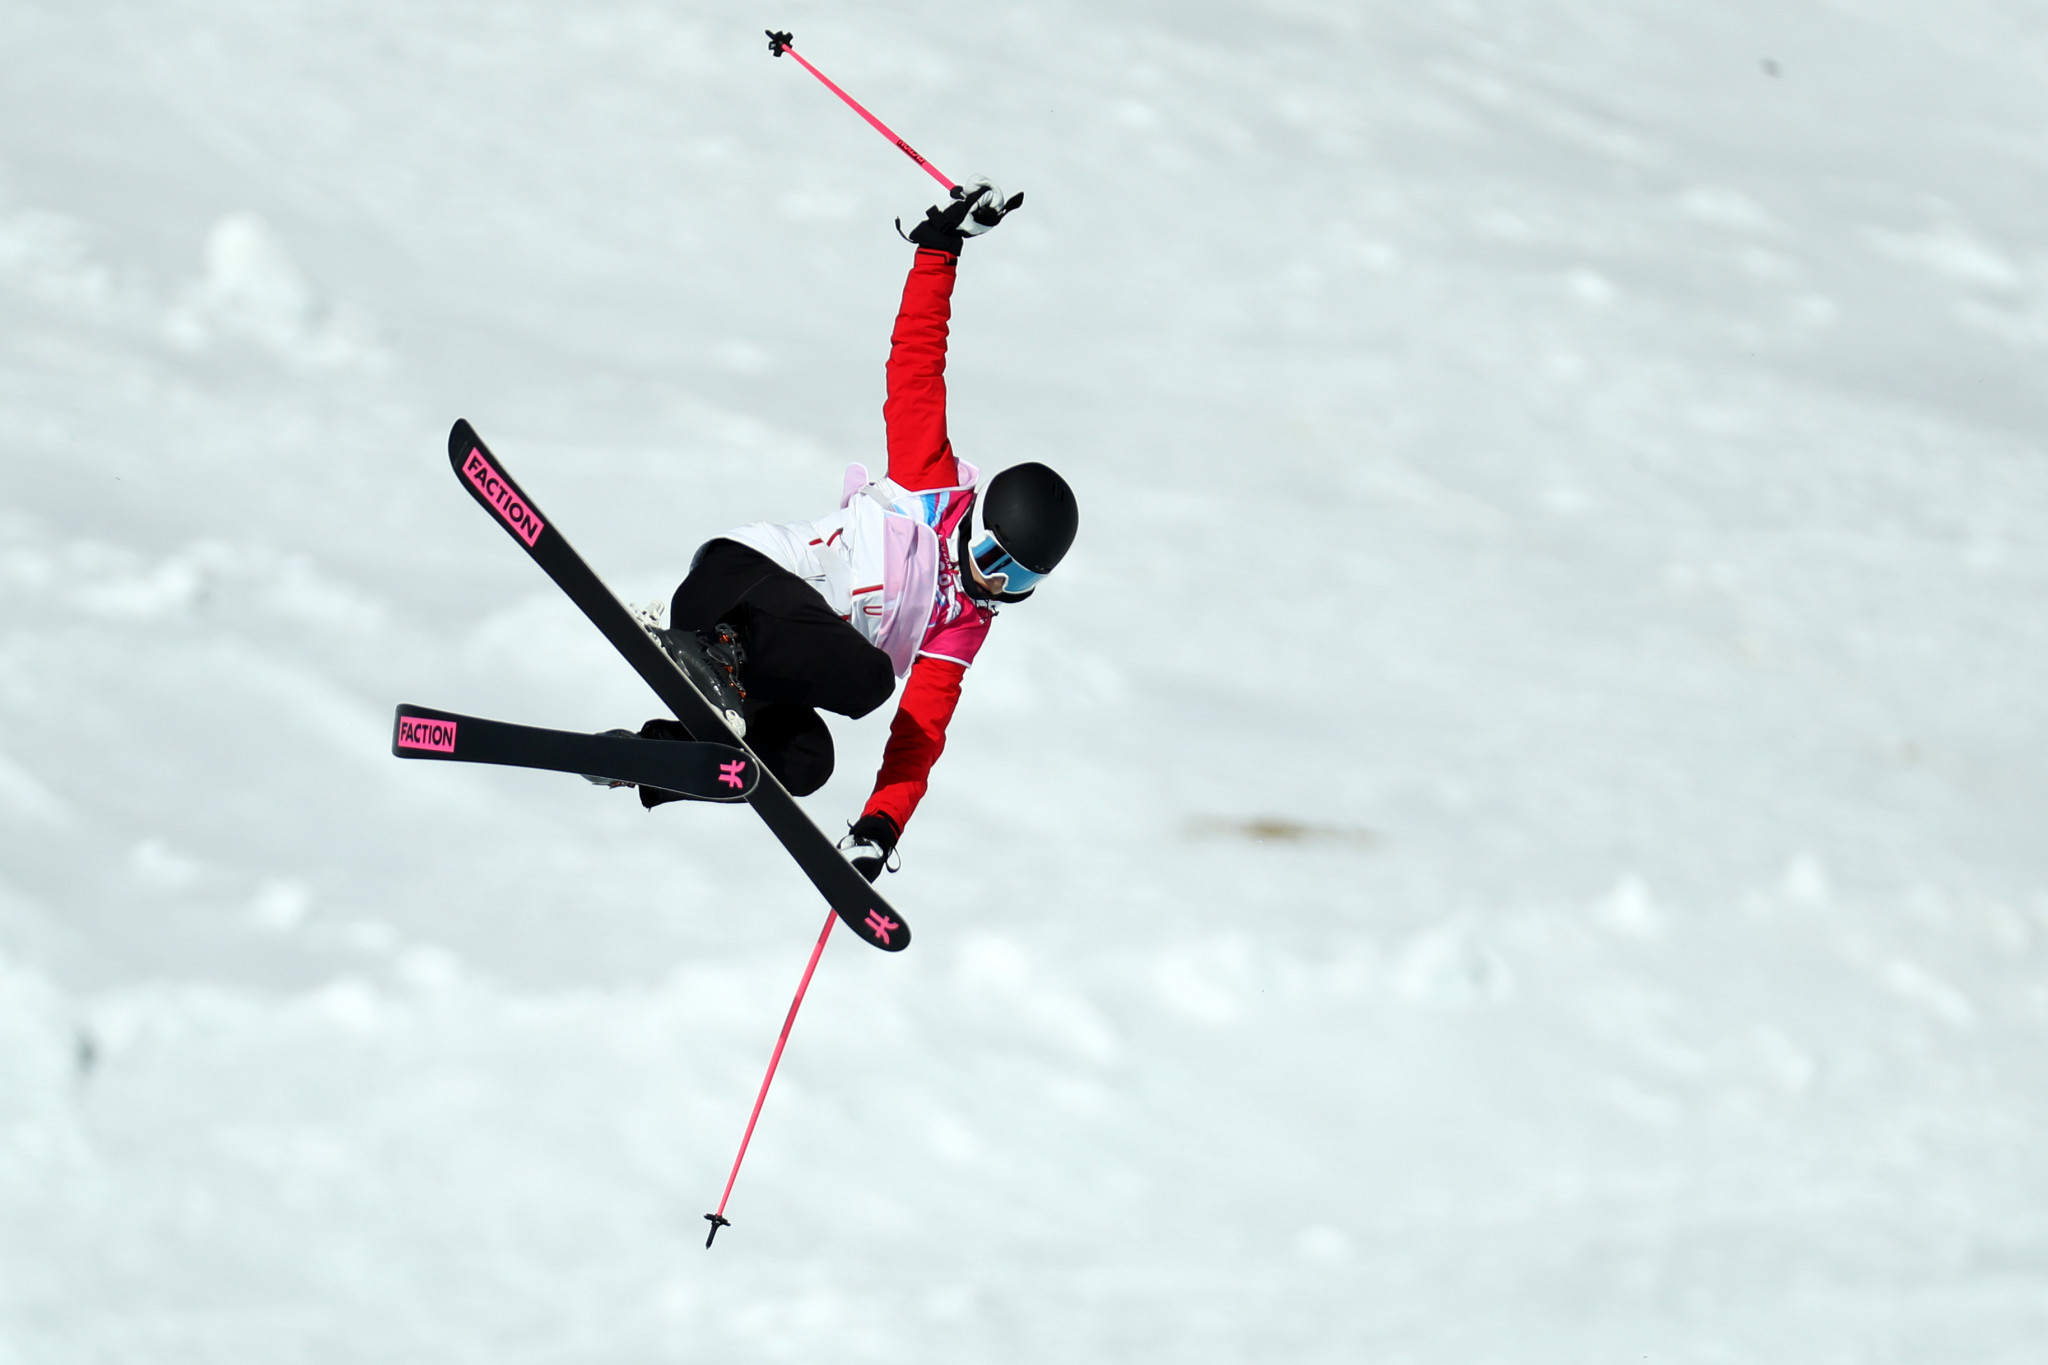 Eileen Gu of China won her second gold medal at Lausanne 2020 ©Getty Images